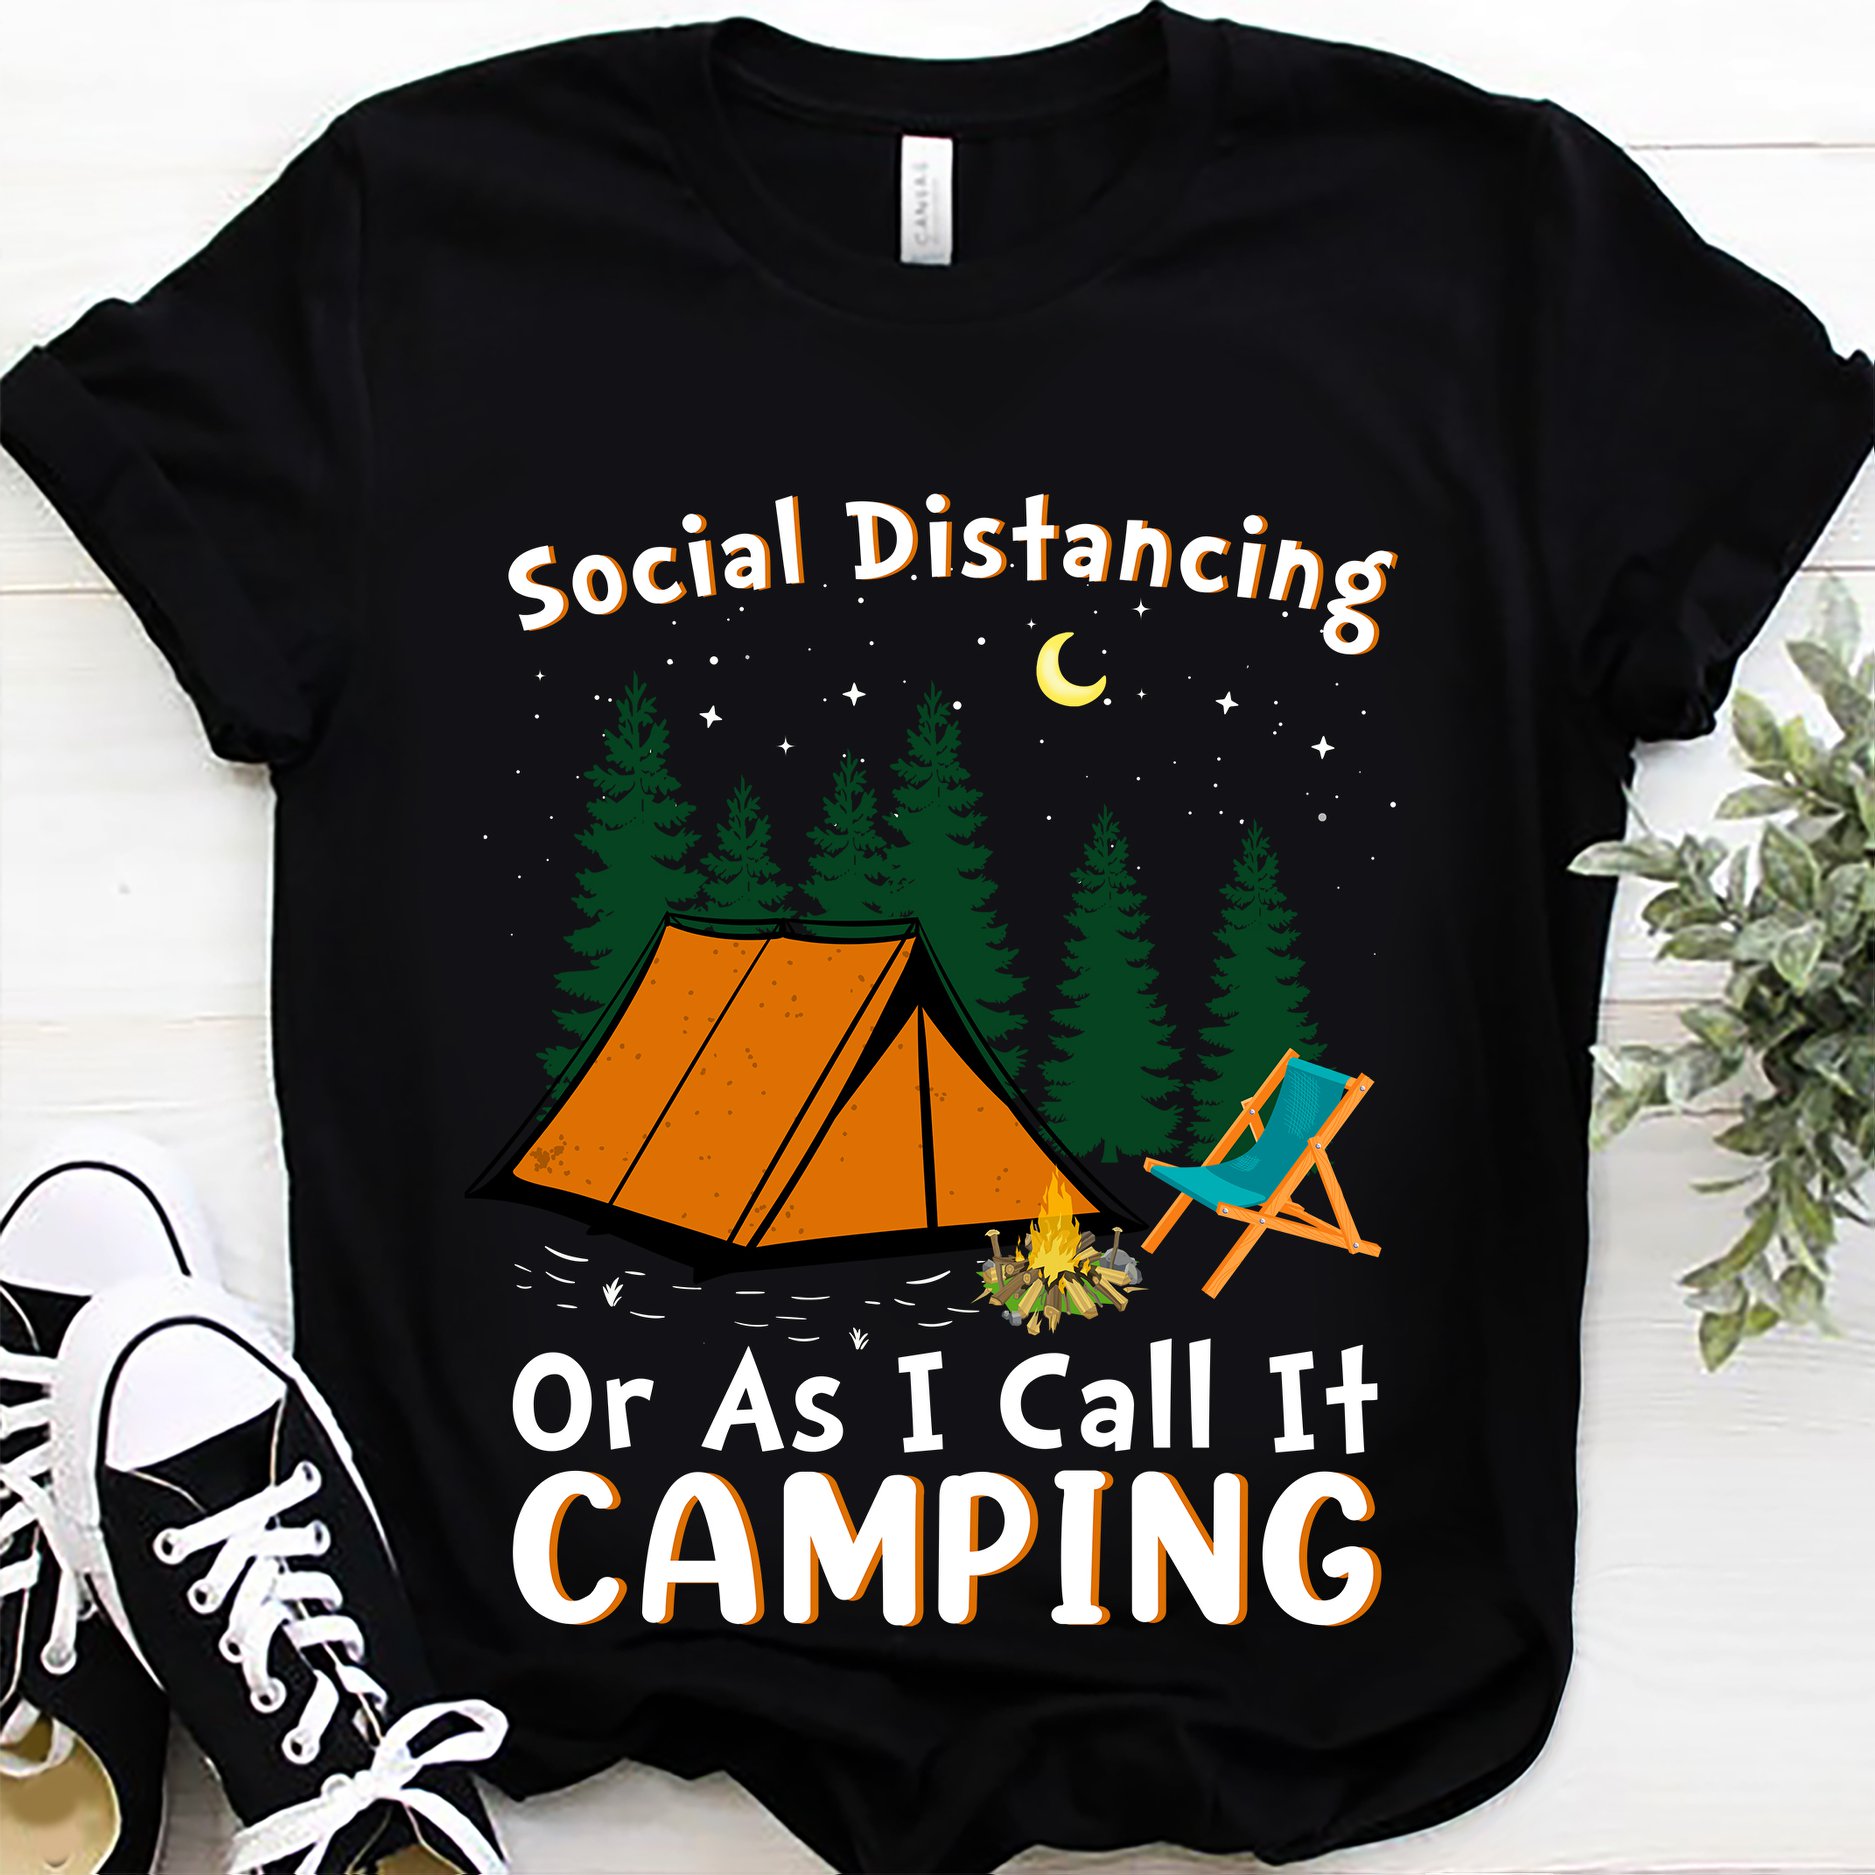 Social distancing or as I call it camping - Camp site and campfire, love camping